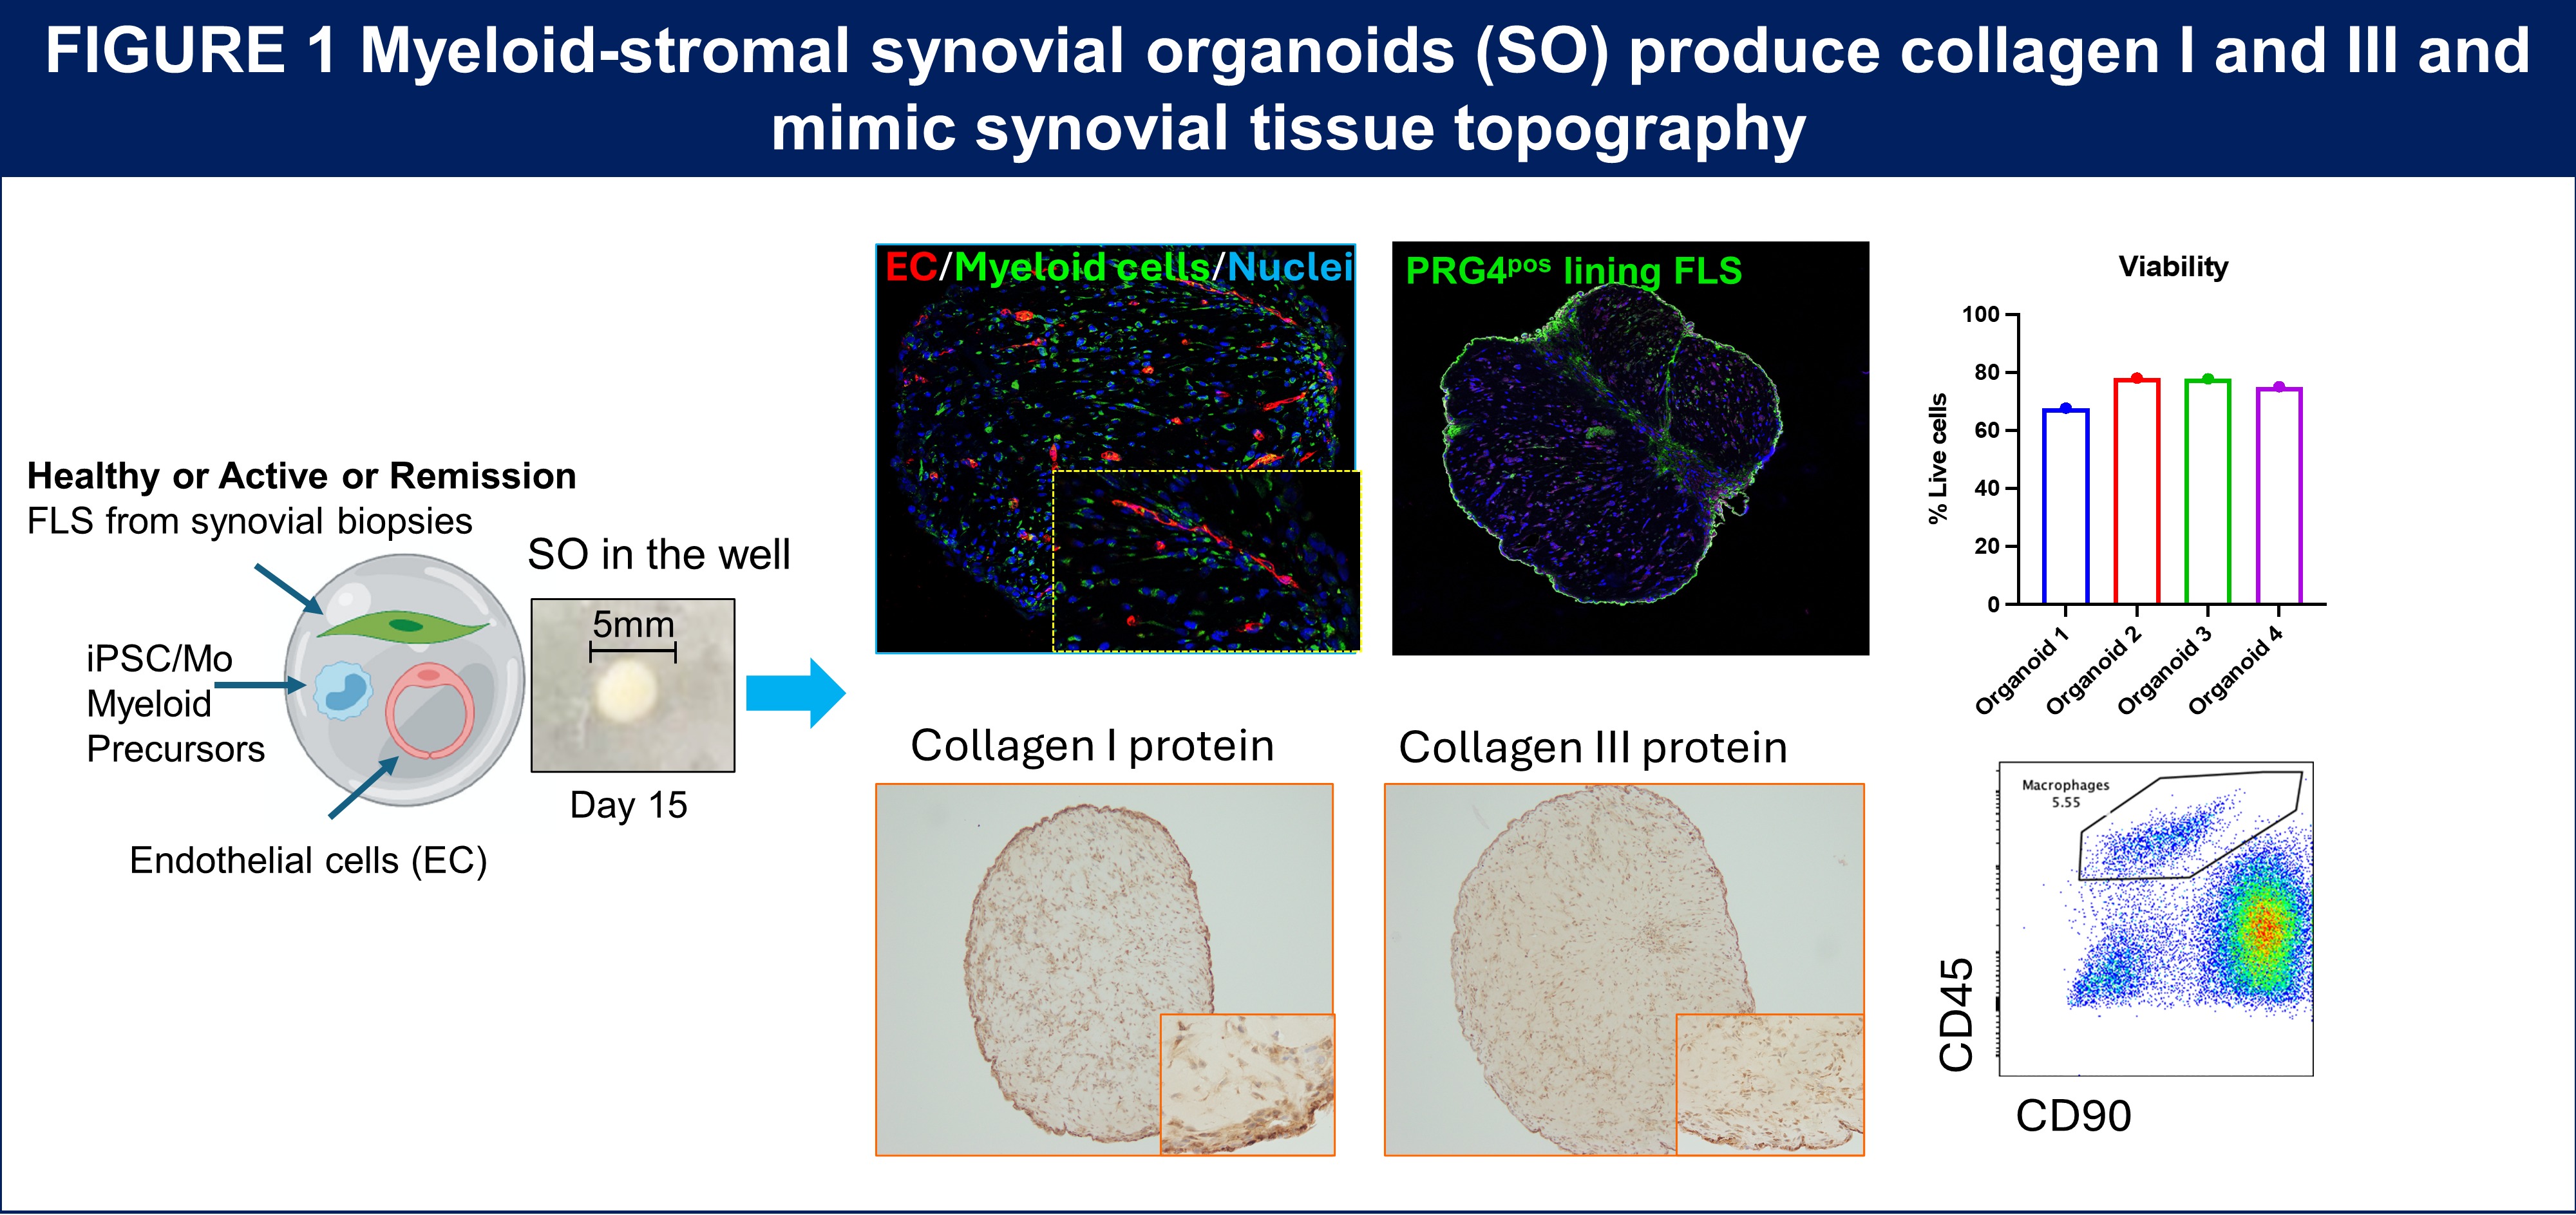 A figure showinf Myeloid-stromal synovial organoids (SO) produce collagen I and III and mimic synovial tissue topography 